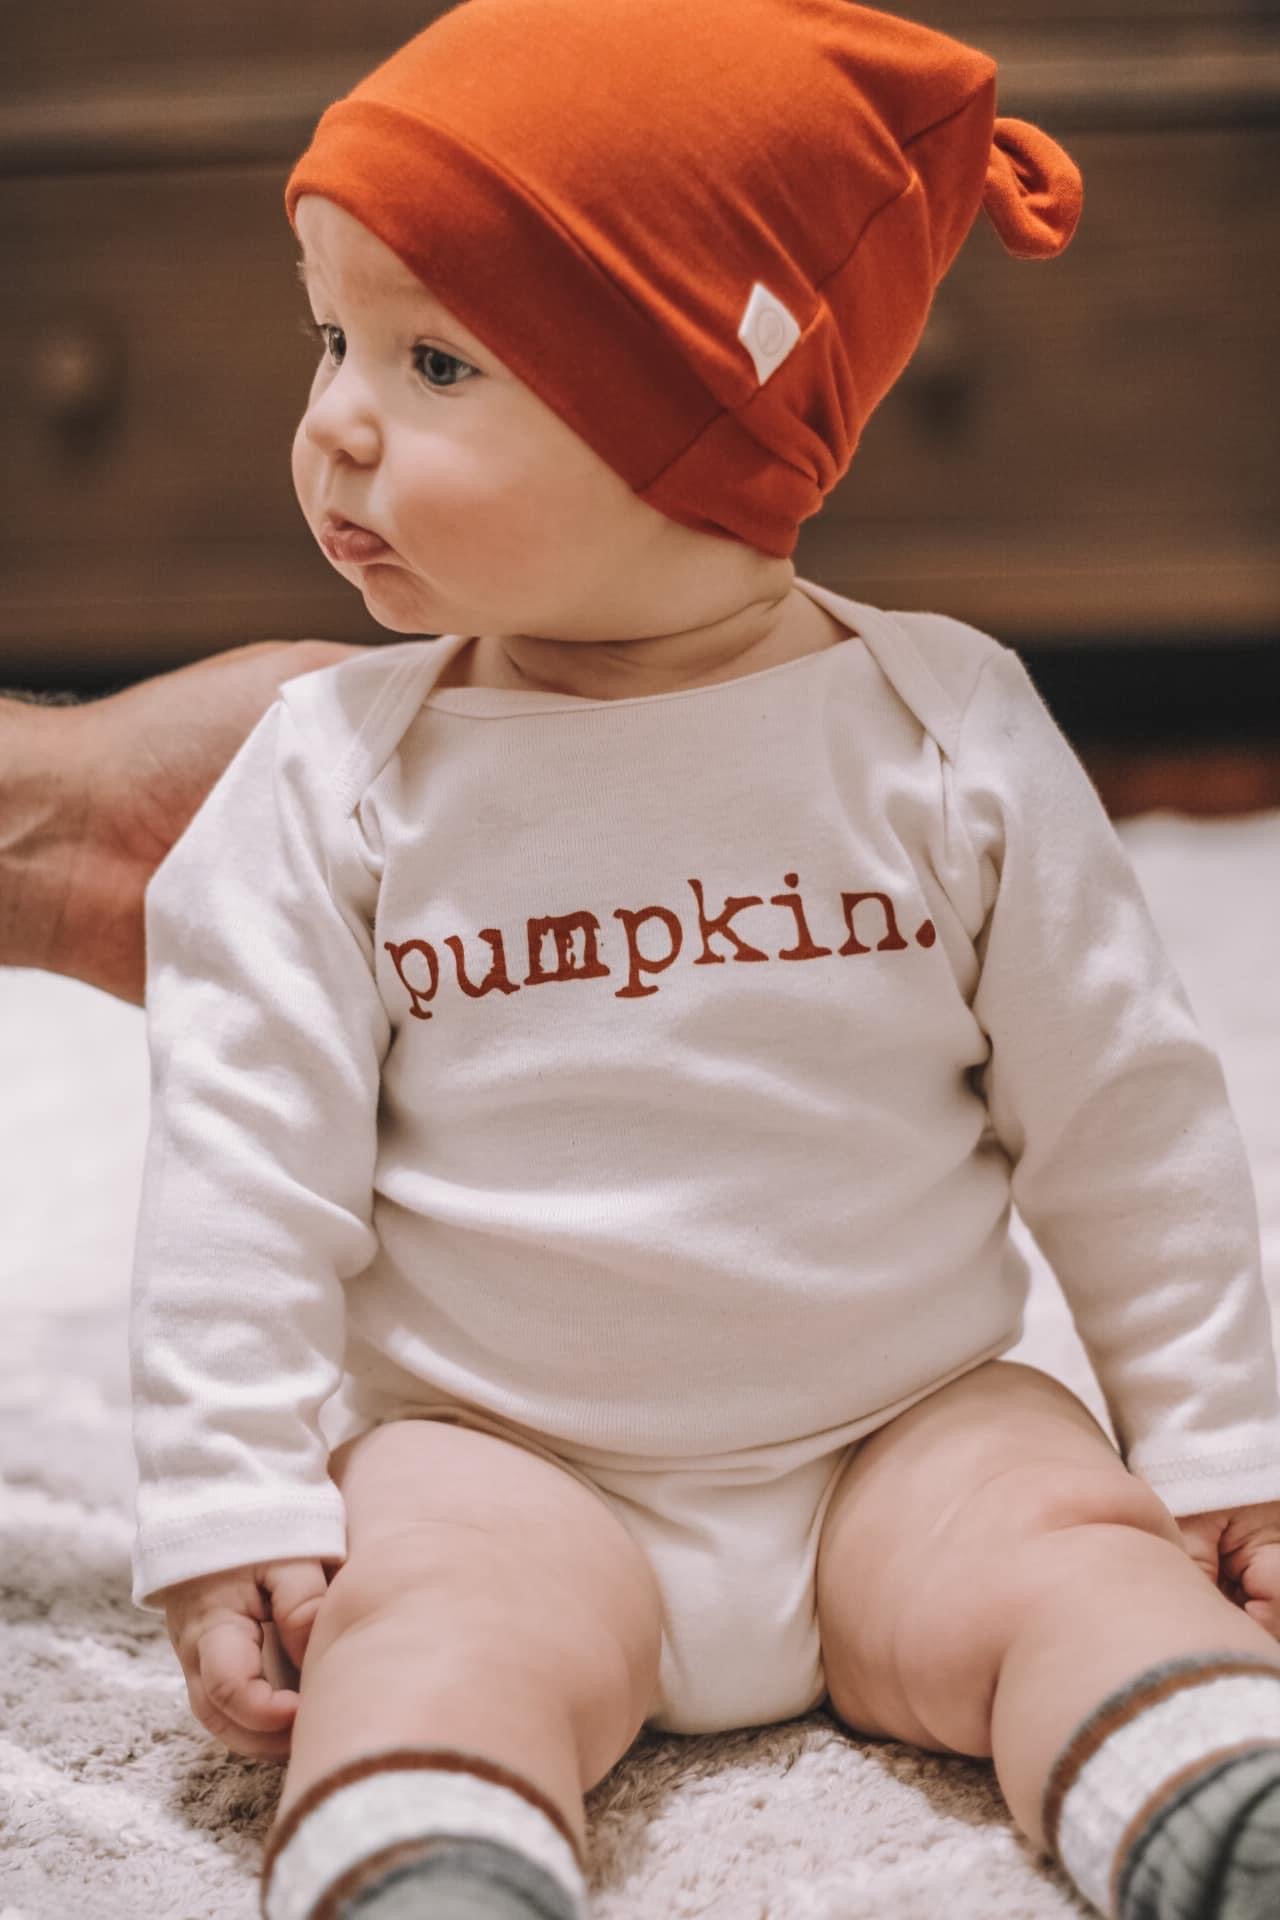 Bamboo Baby Top Knot Hat - Rust